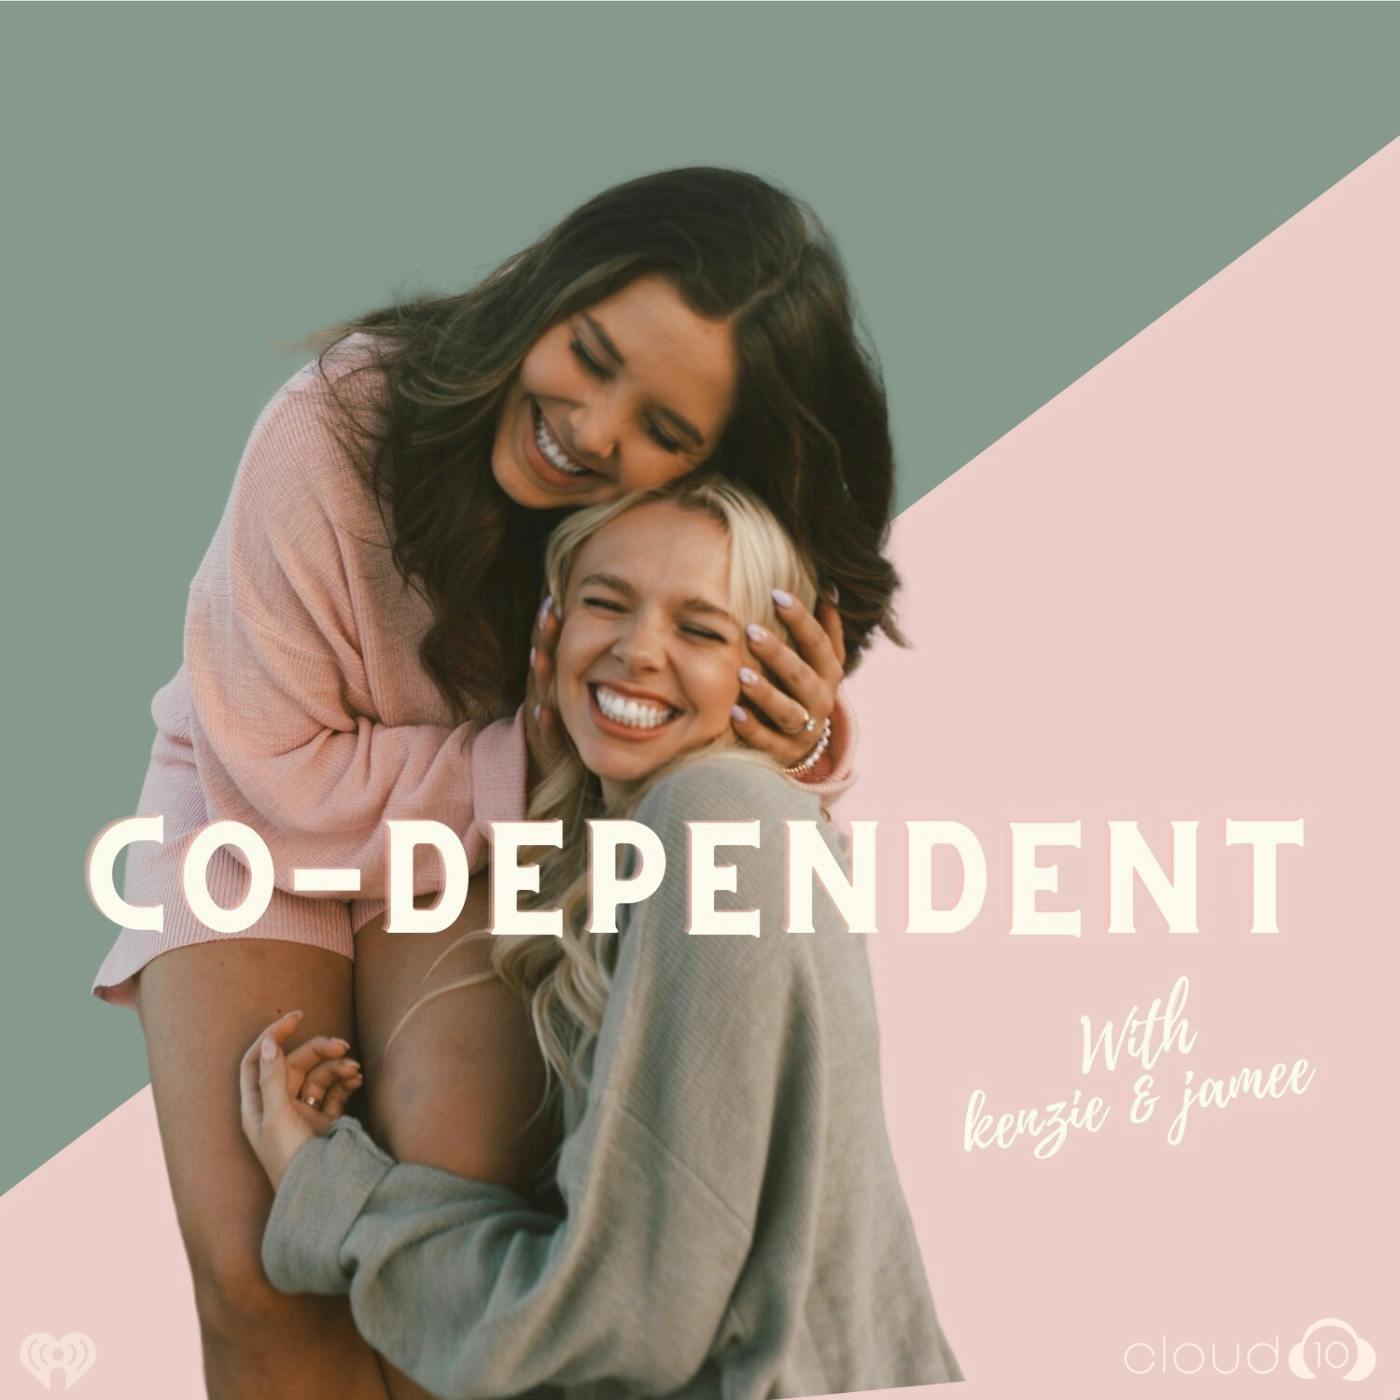 Co-dependent Podcast:Cloud10 and iHeartPodcasts